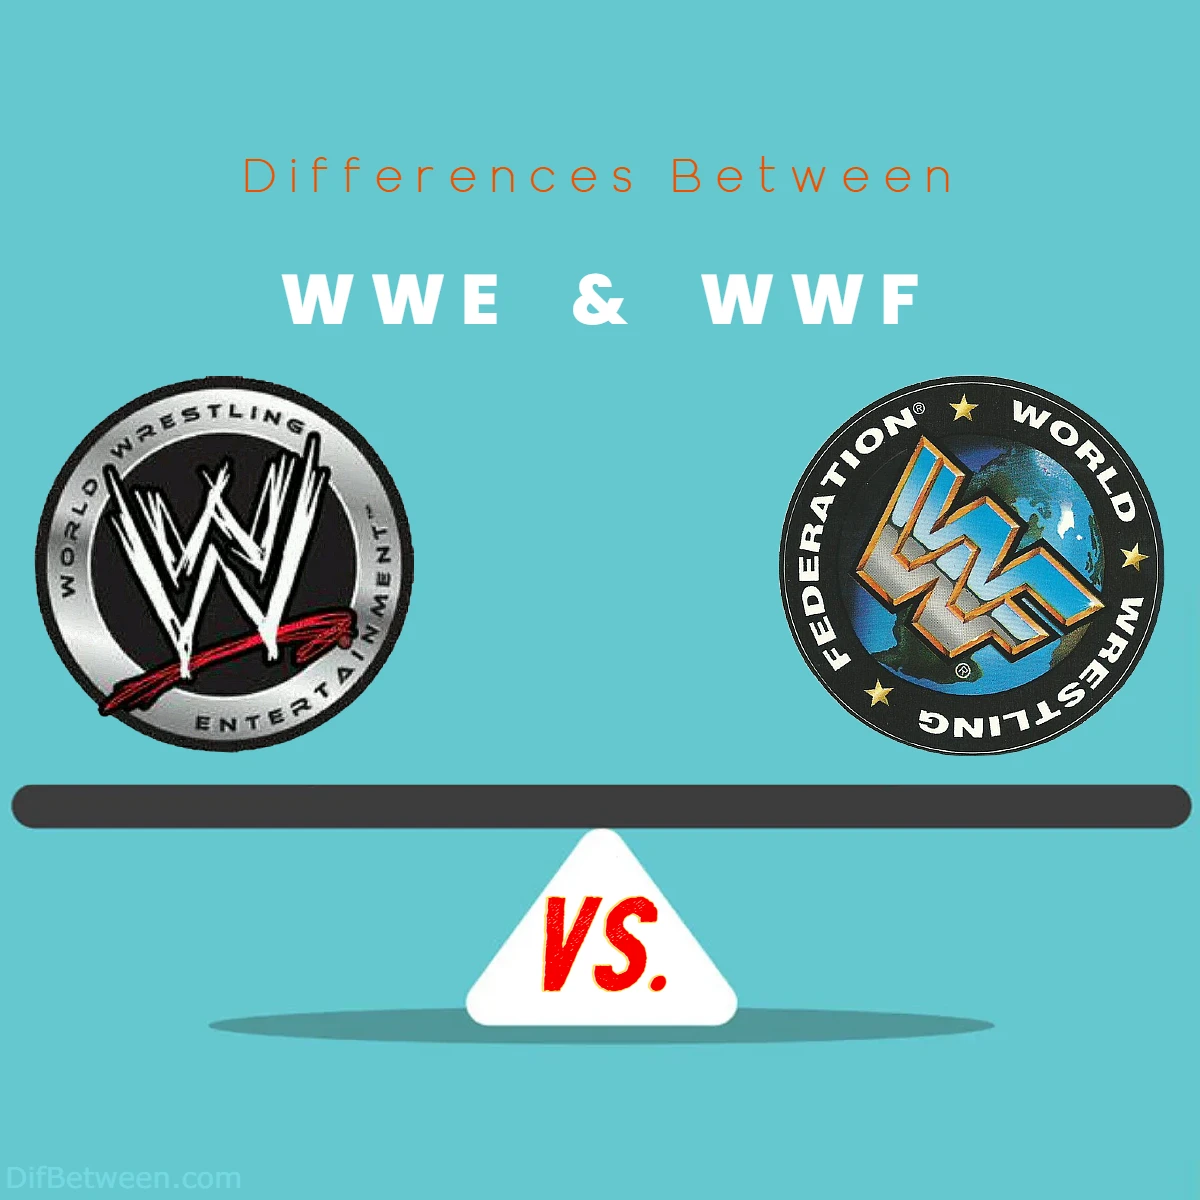 Differences Between WWE vs WWF